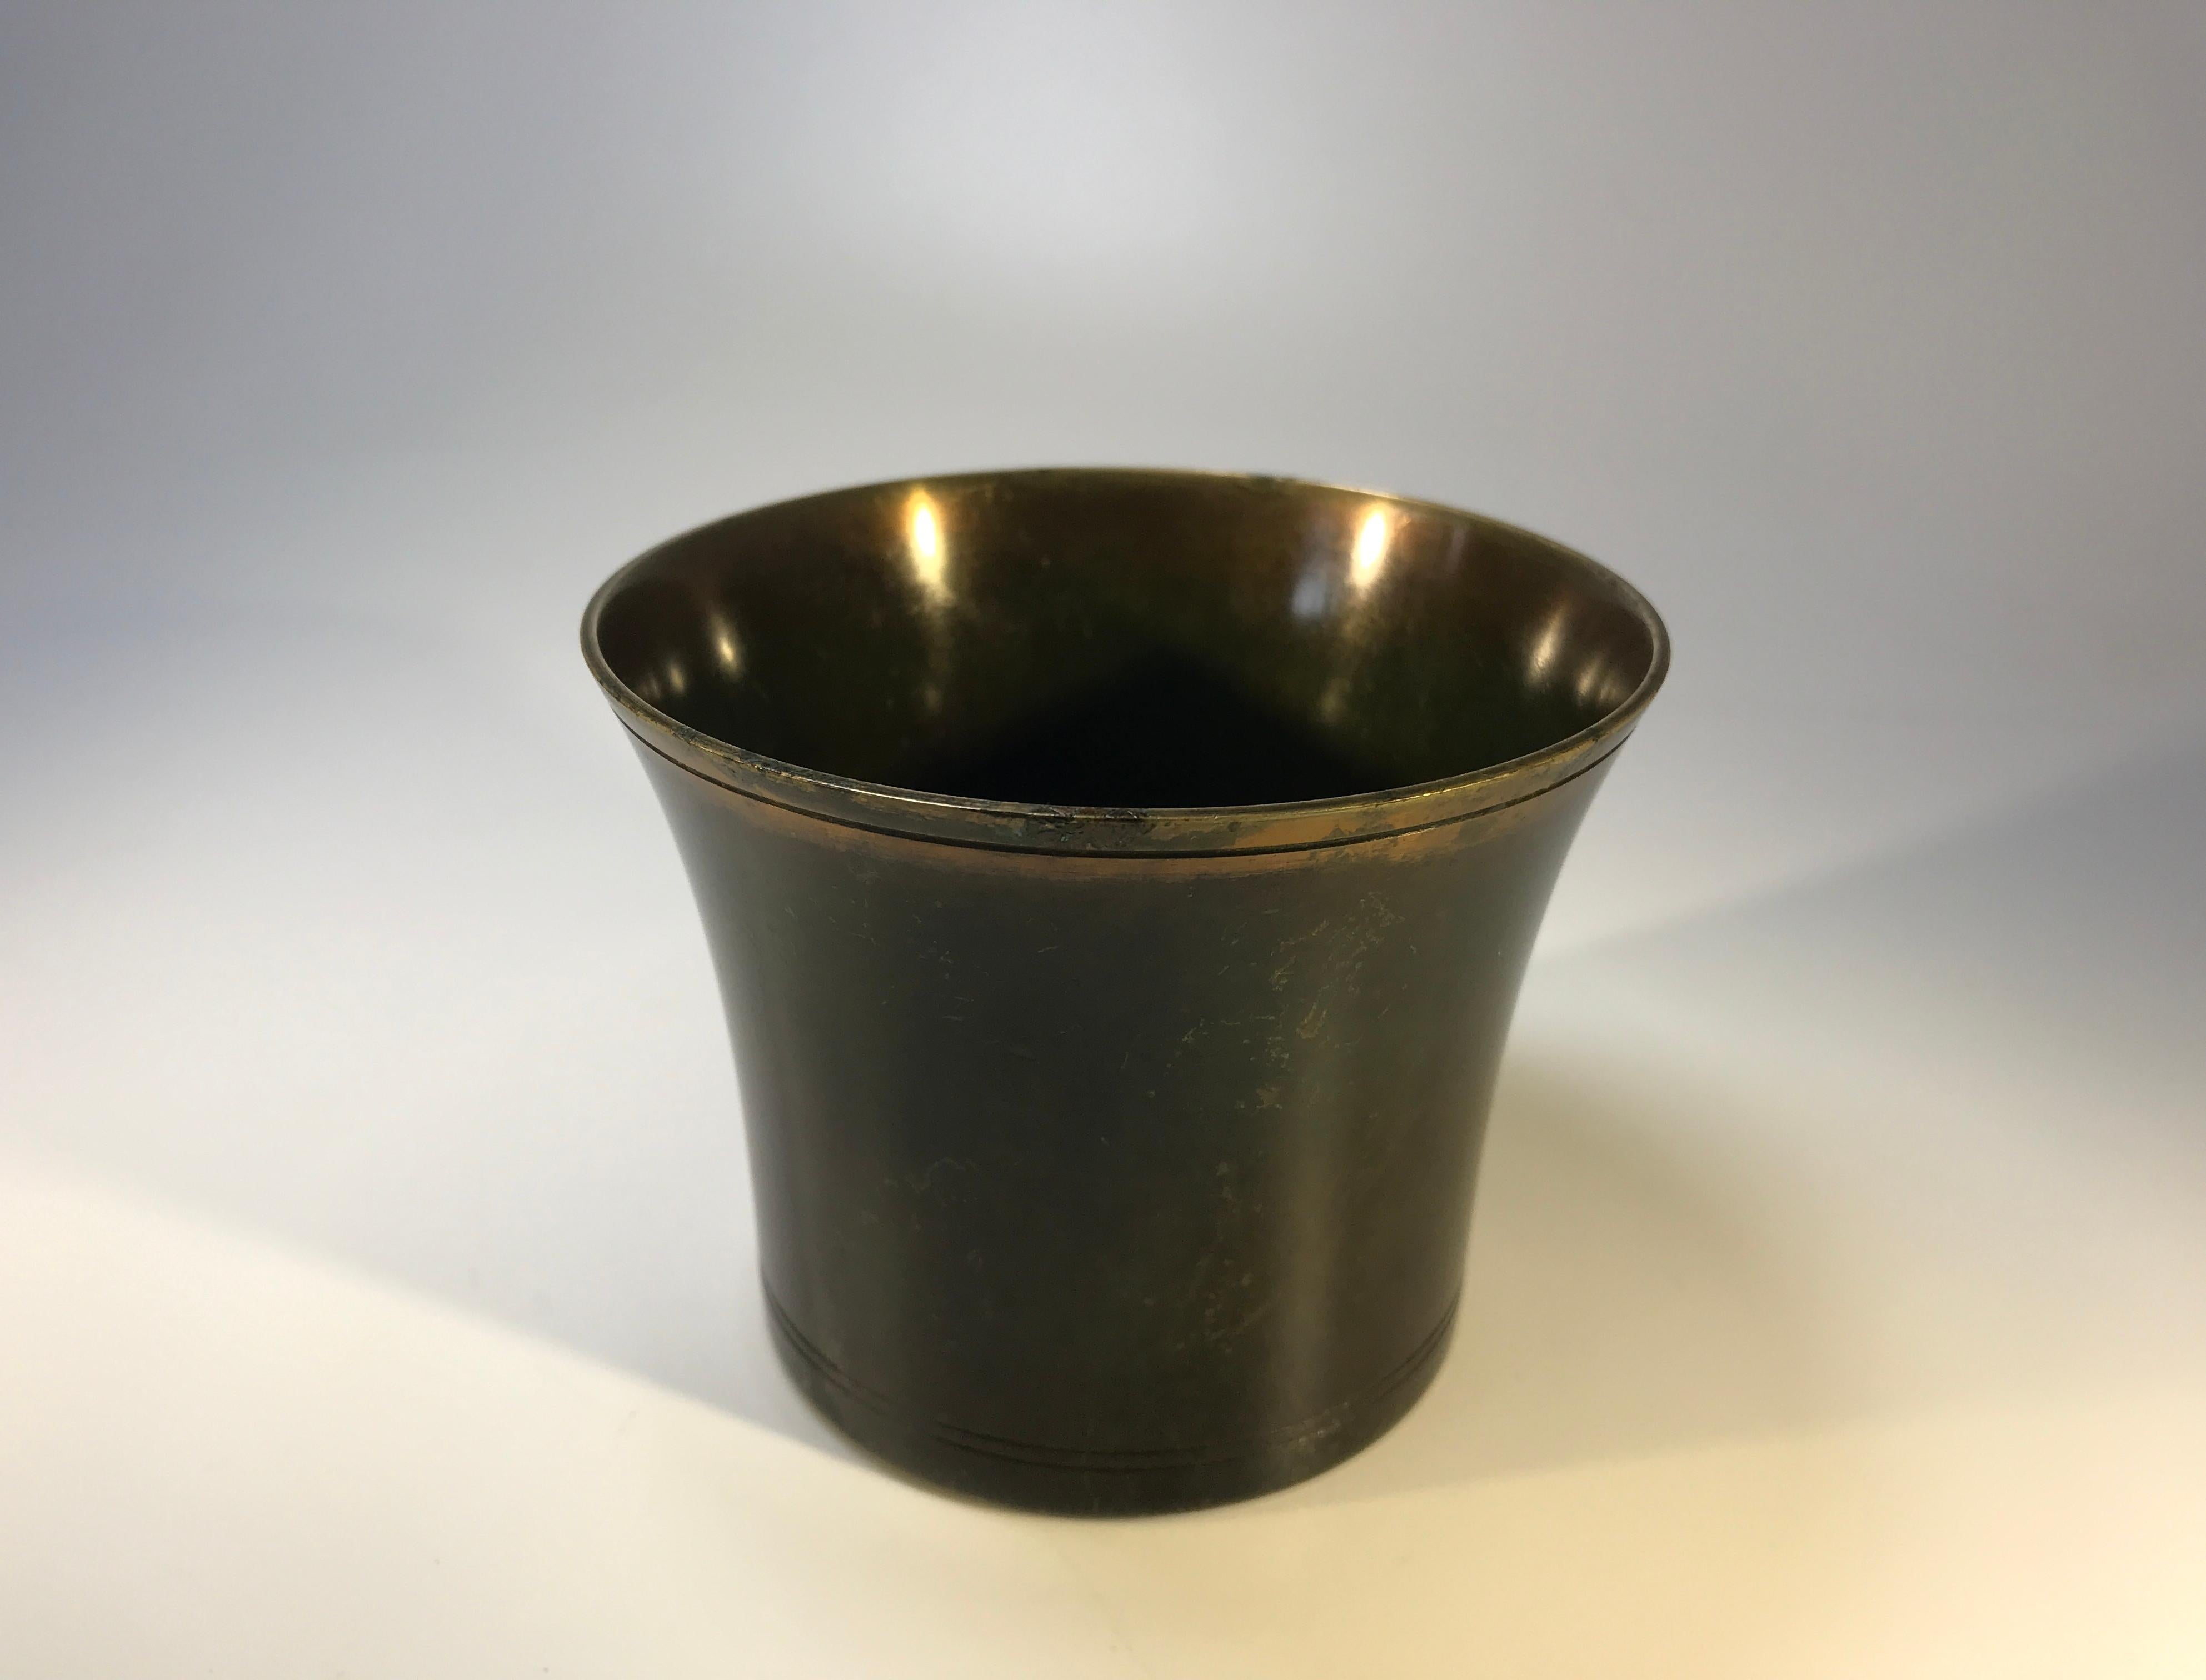 Just Andersen bronze cache pot with engraved trim
A small Danish pot with character and history
Stamped and numbered LB 1161 on base
Measures: Height 2.75 inch, diameter 3.5 inch
In good condition and lovely dark patina. Has outer surface scratches